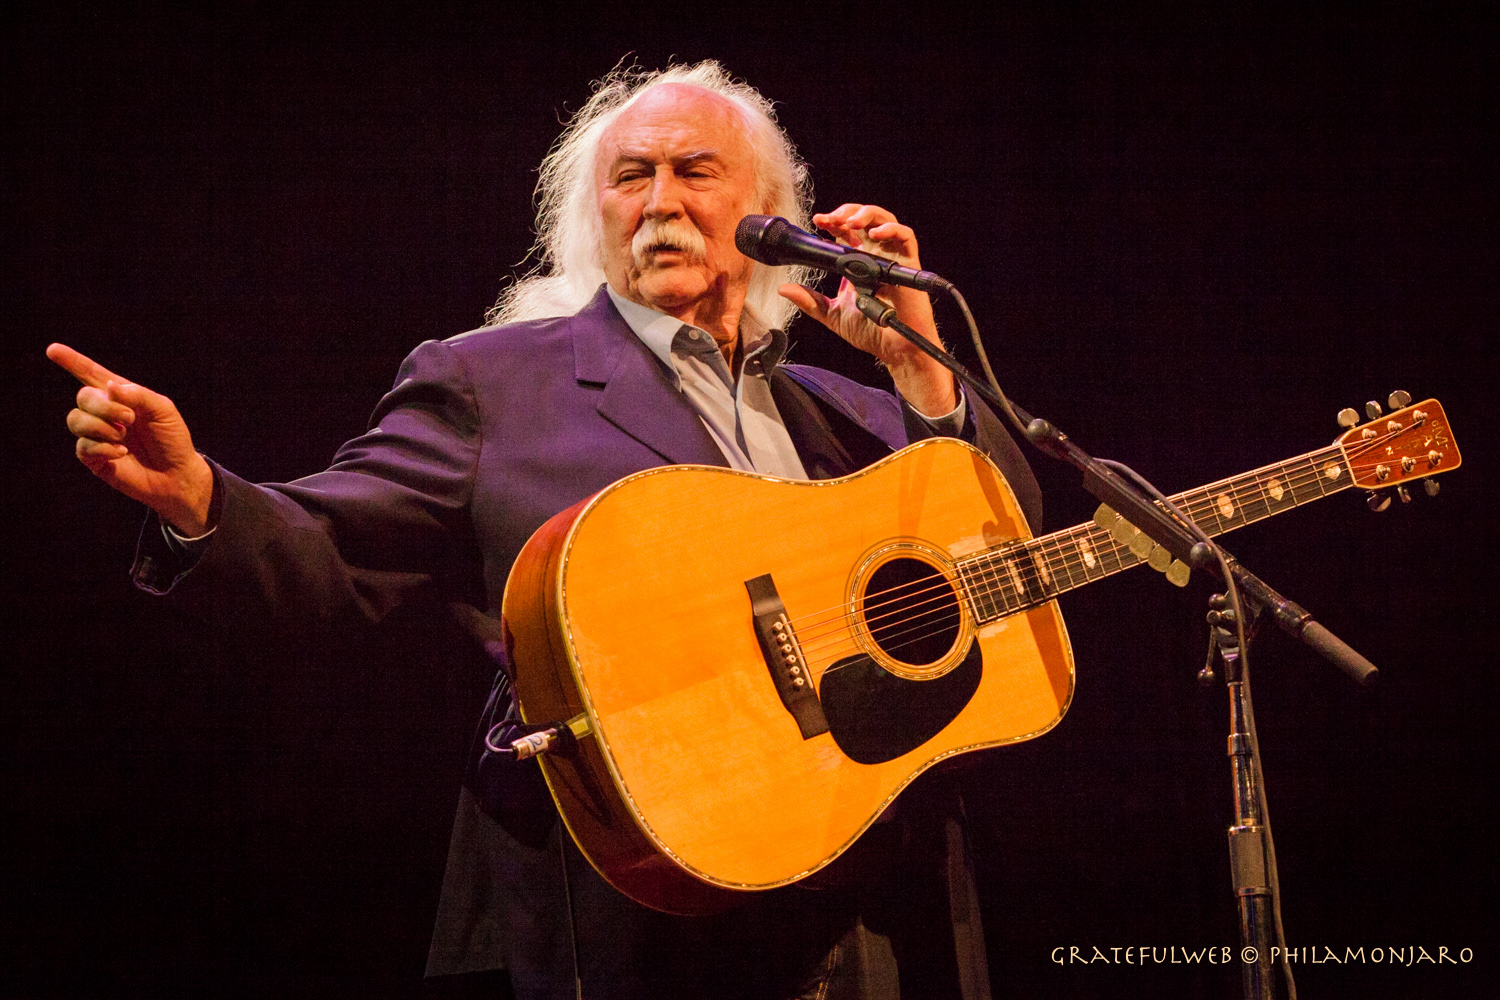 David Crosby: What’s In A Name?